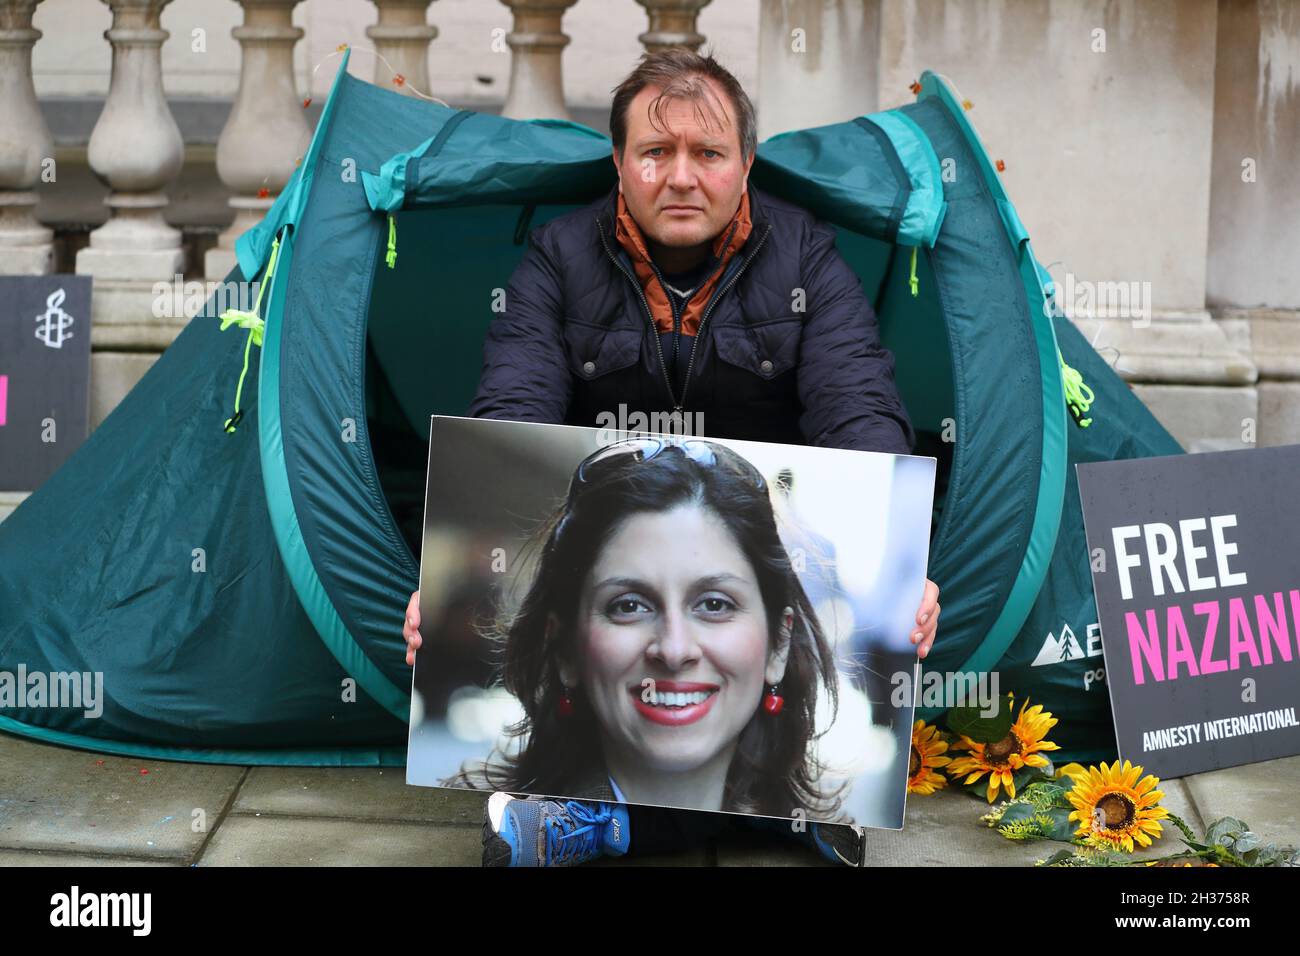 London, UK. 26th Oct, 2021. London, UK, October 26th. Nazanin Zaghari-Ratcliffe's husband Richard begins the second day of his hunger strike outside the Foreign and Commonwealth Office demanding the government does more to free his wife who is detained in Iran on spying charges since 2016 and has not seen her daughters since 2 years. Credit: Uwe Deffner/Alamy Live News Stock Photo